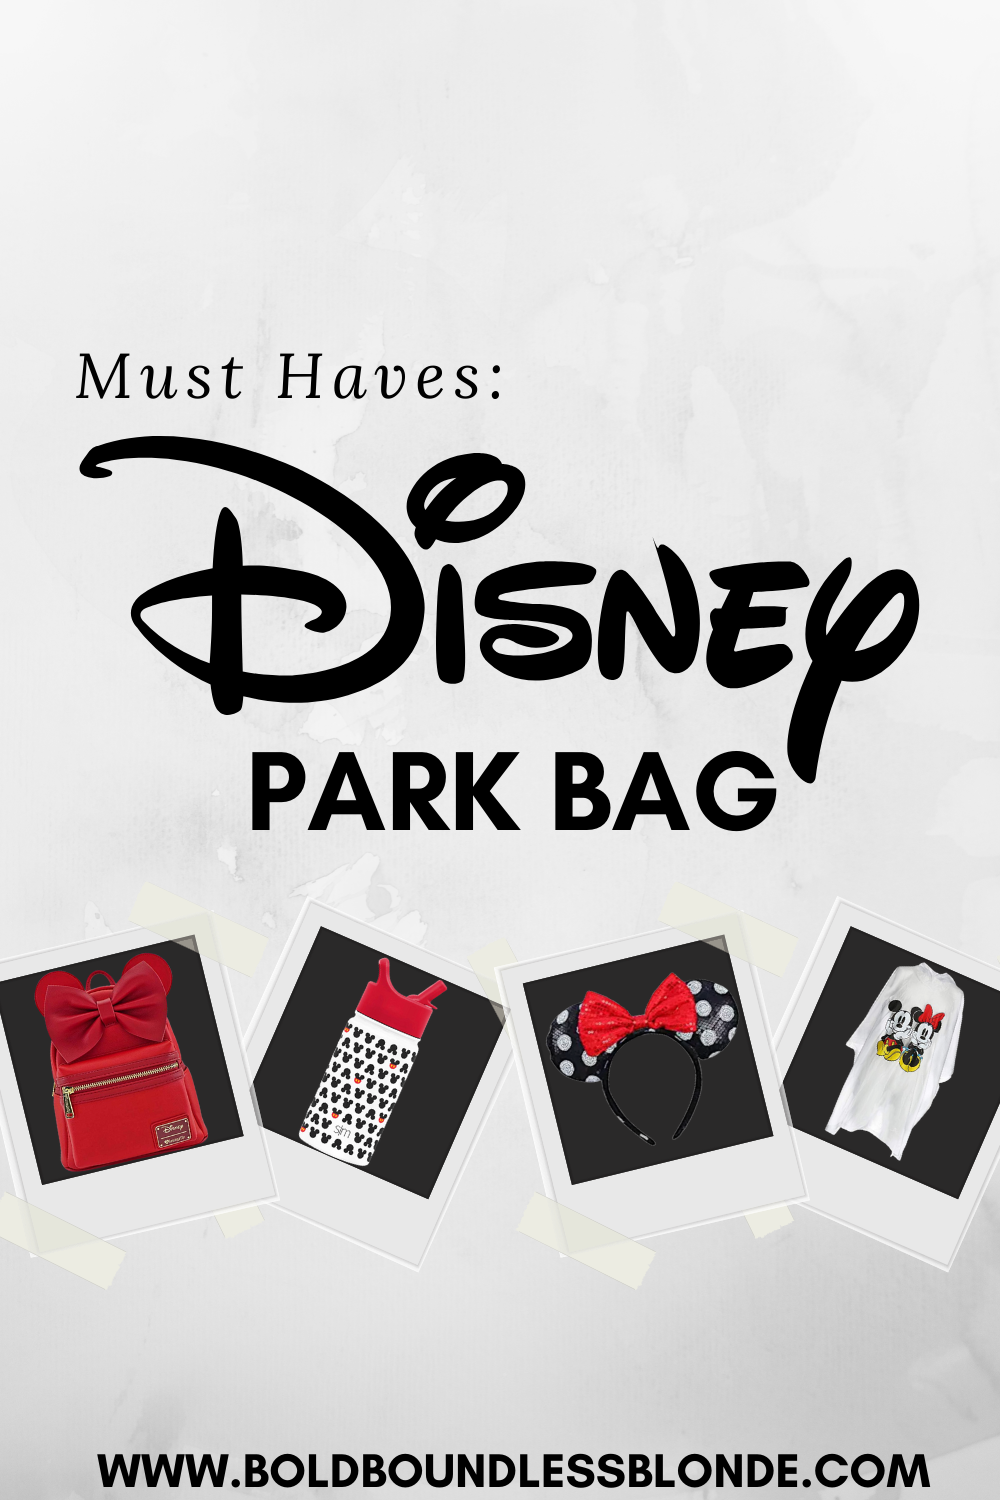 Disney Park Bag Must Haves Disney With Kids Disney World Disney Parks First Time At Disney What To Pack for Disney Amazon Disney Finds Shop Disney #Disney #WaltDisneyWorld #DisneyParkBag #DisneyMustHaves #ShopDisney #DisneyVacation #VisitDisney